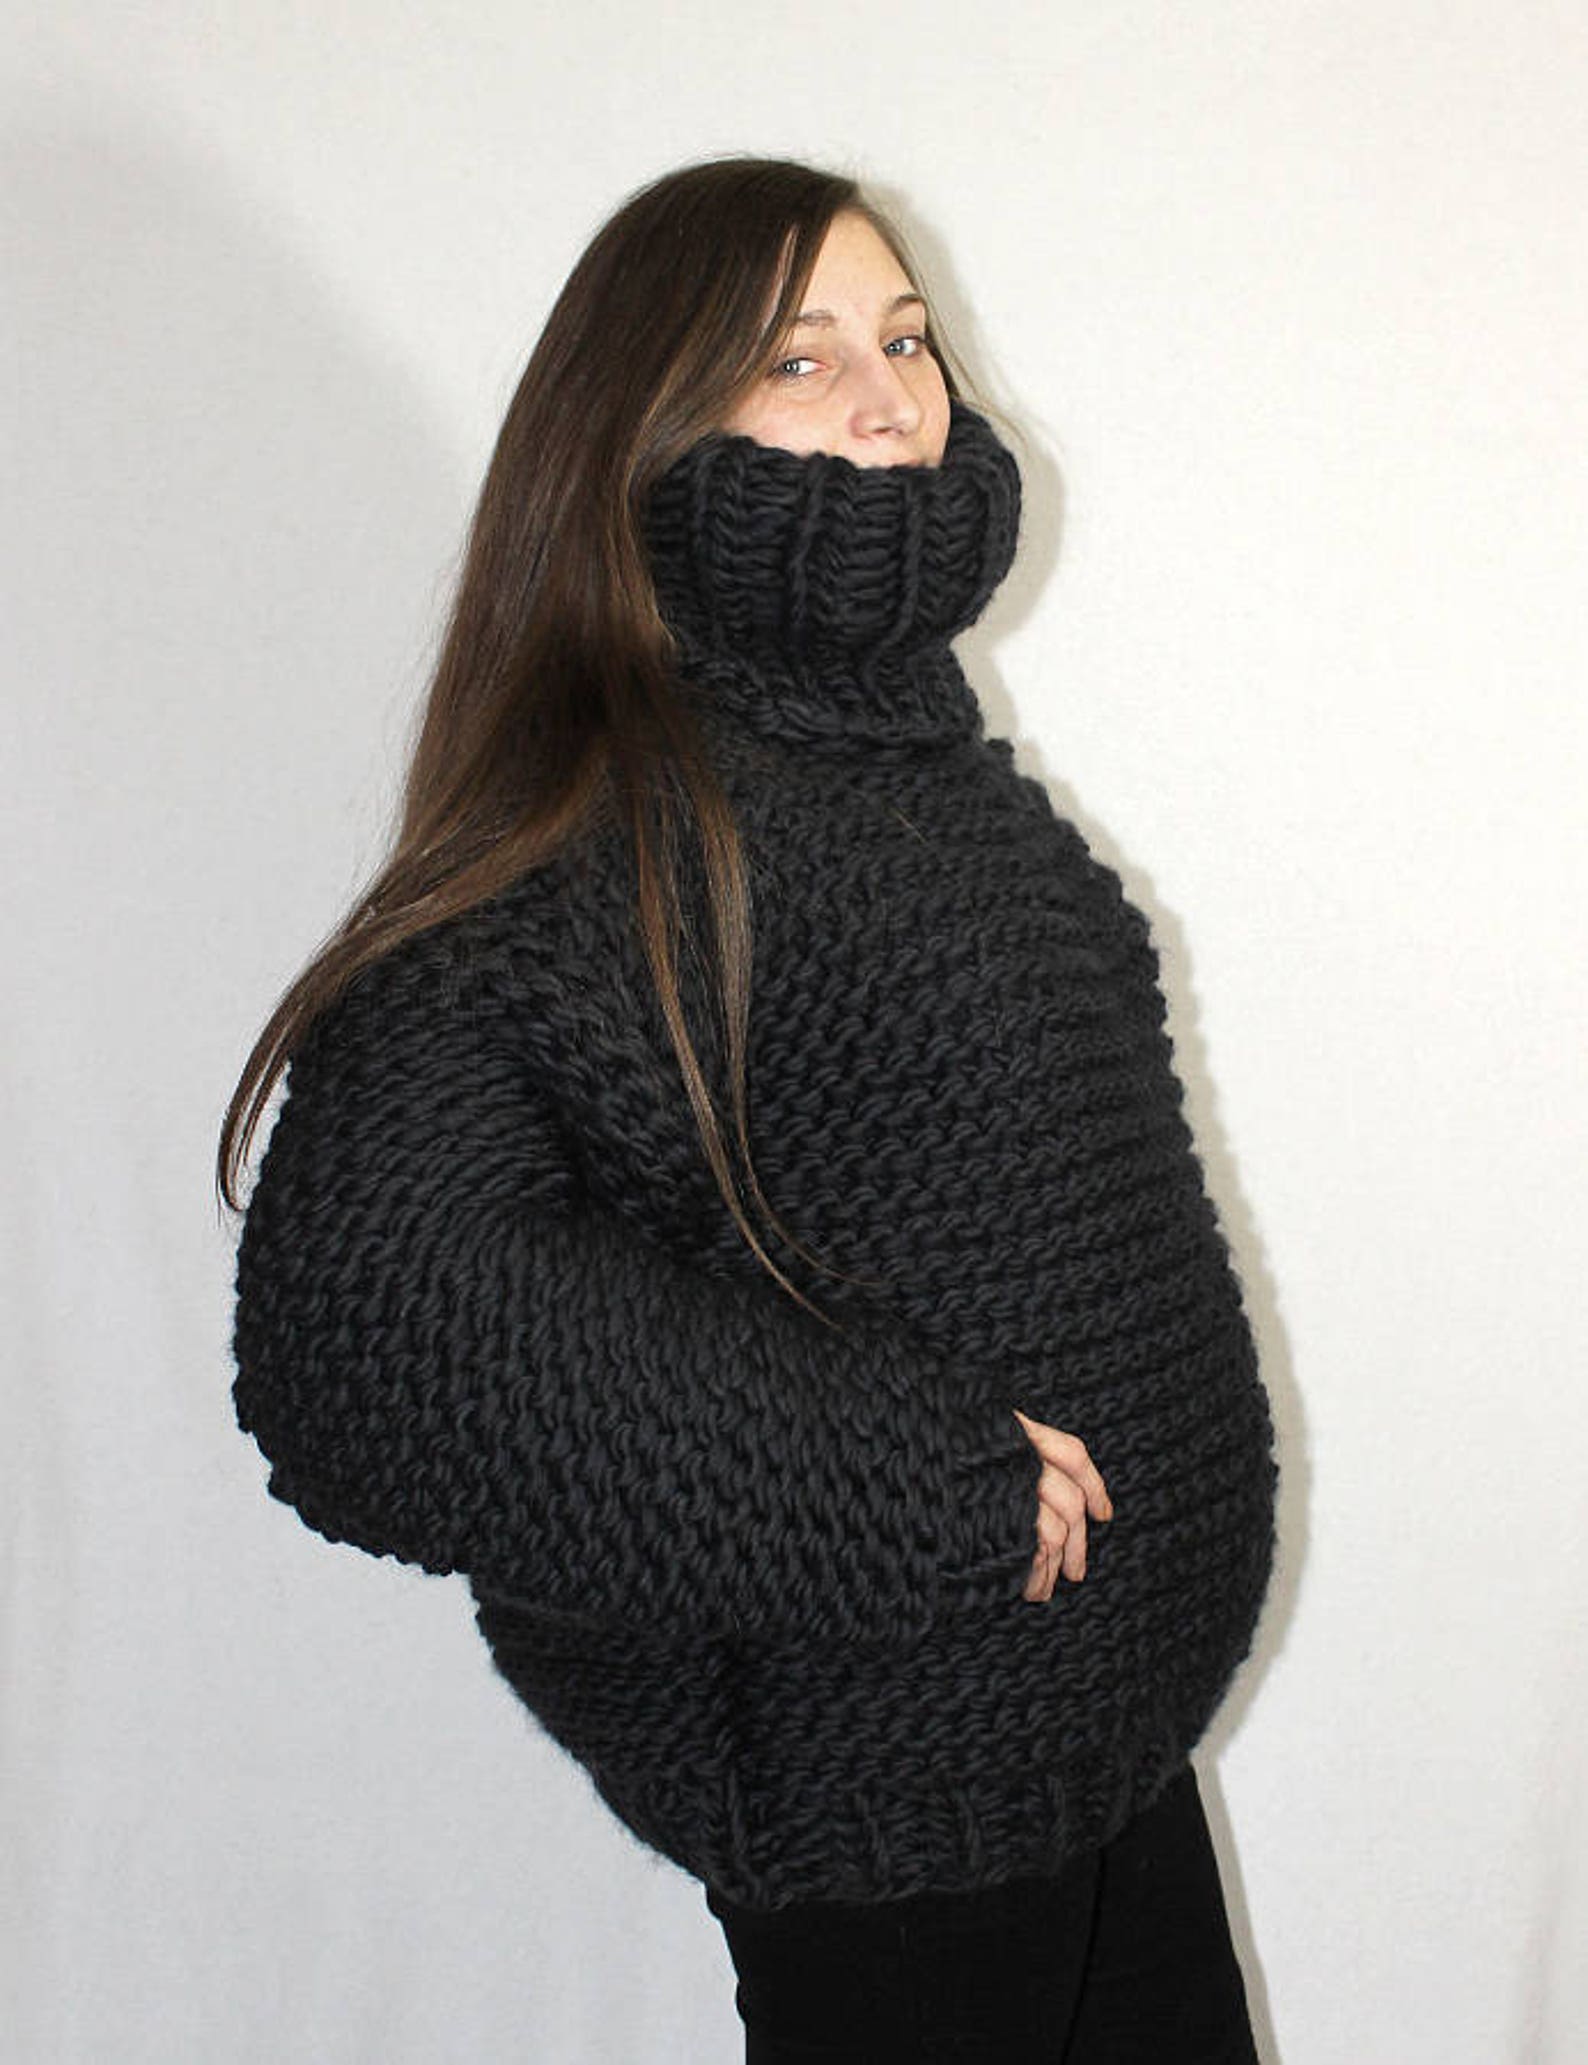 3 Kg Thick Turtleneck Sweater Chunky Knit Wool Jumper Thick Knit ...